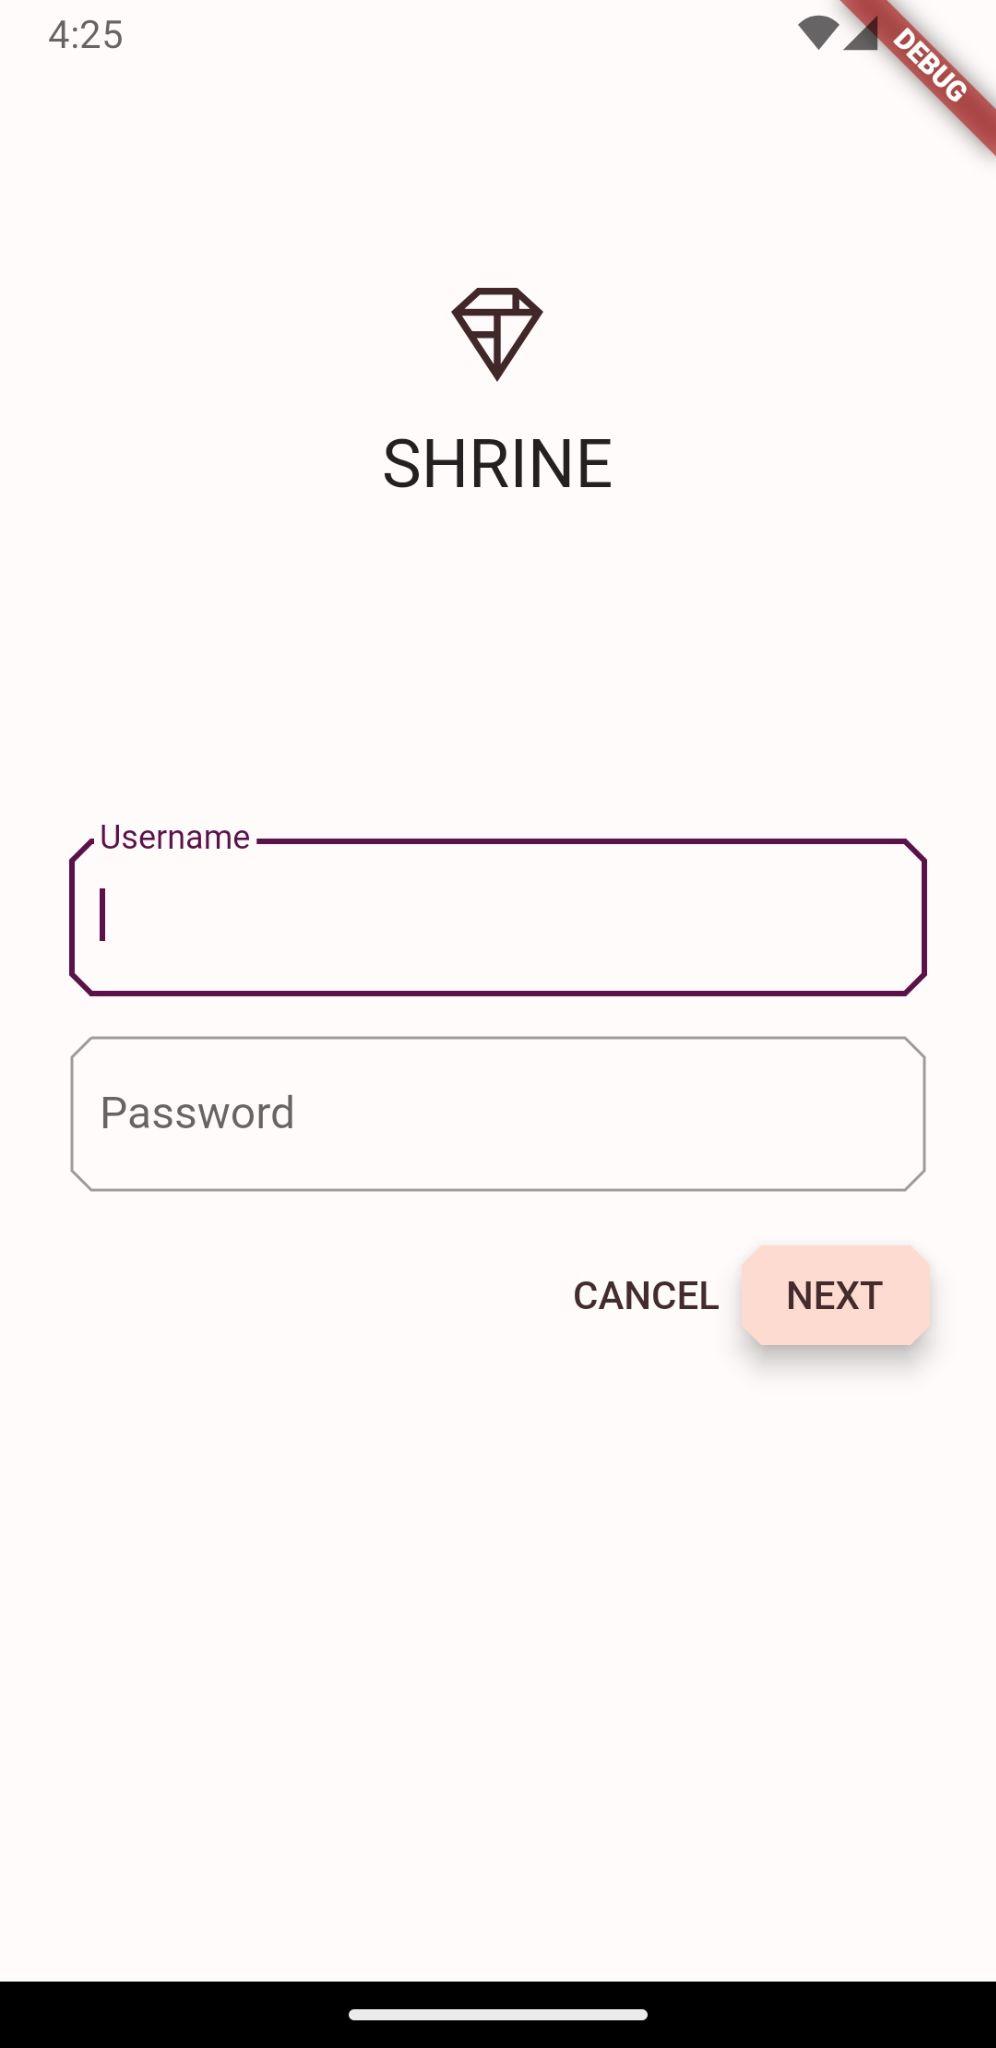 Shrine login page with a purple and pink theme